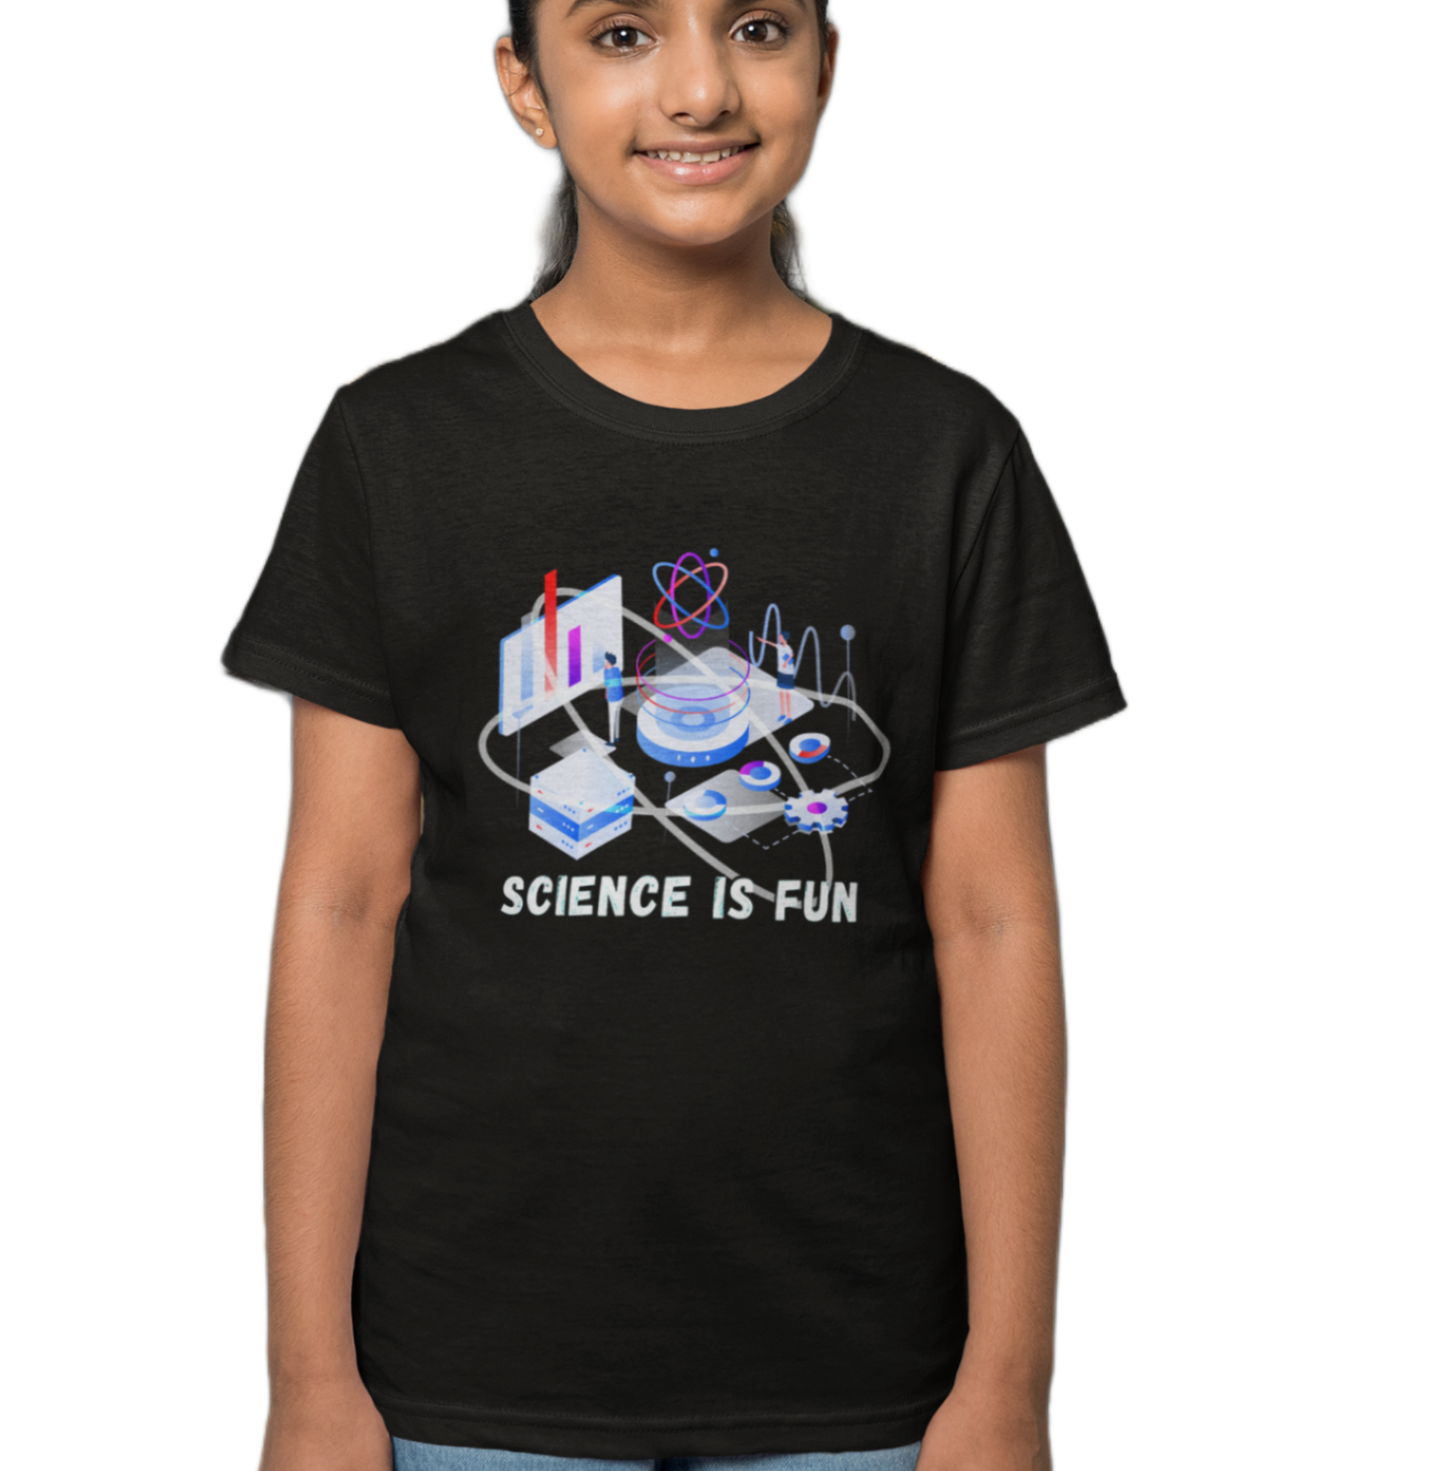 Science is Fun T-shirt for Kids Black